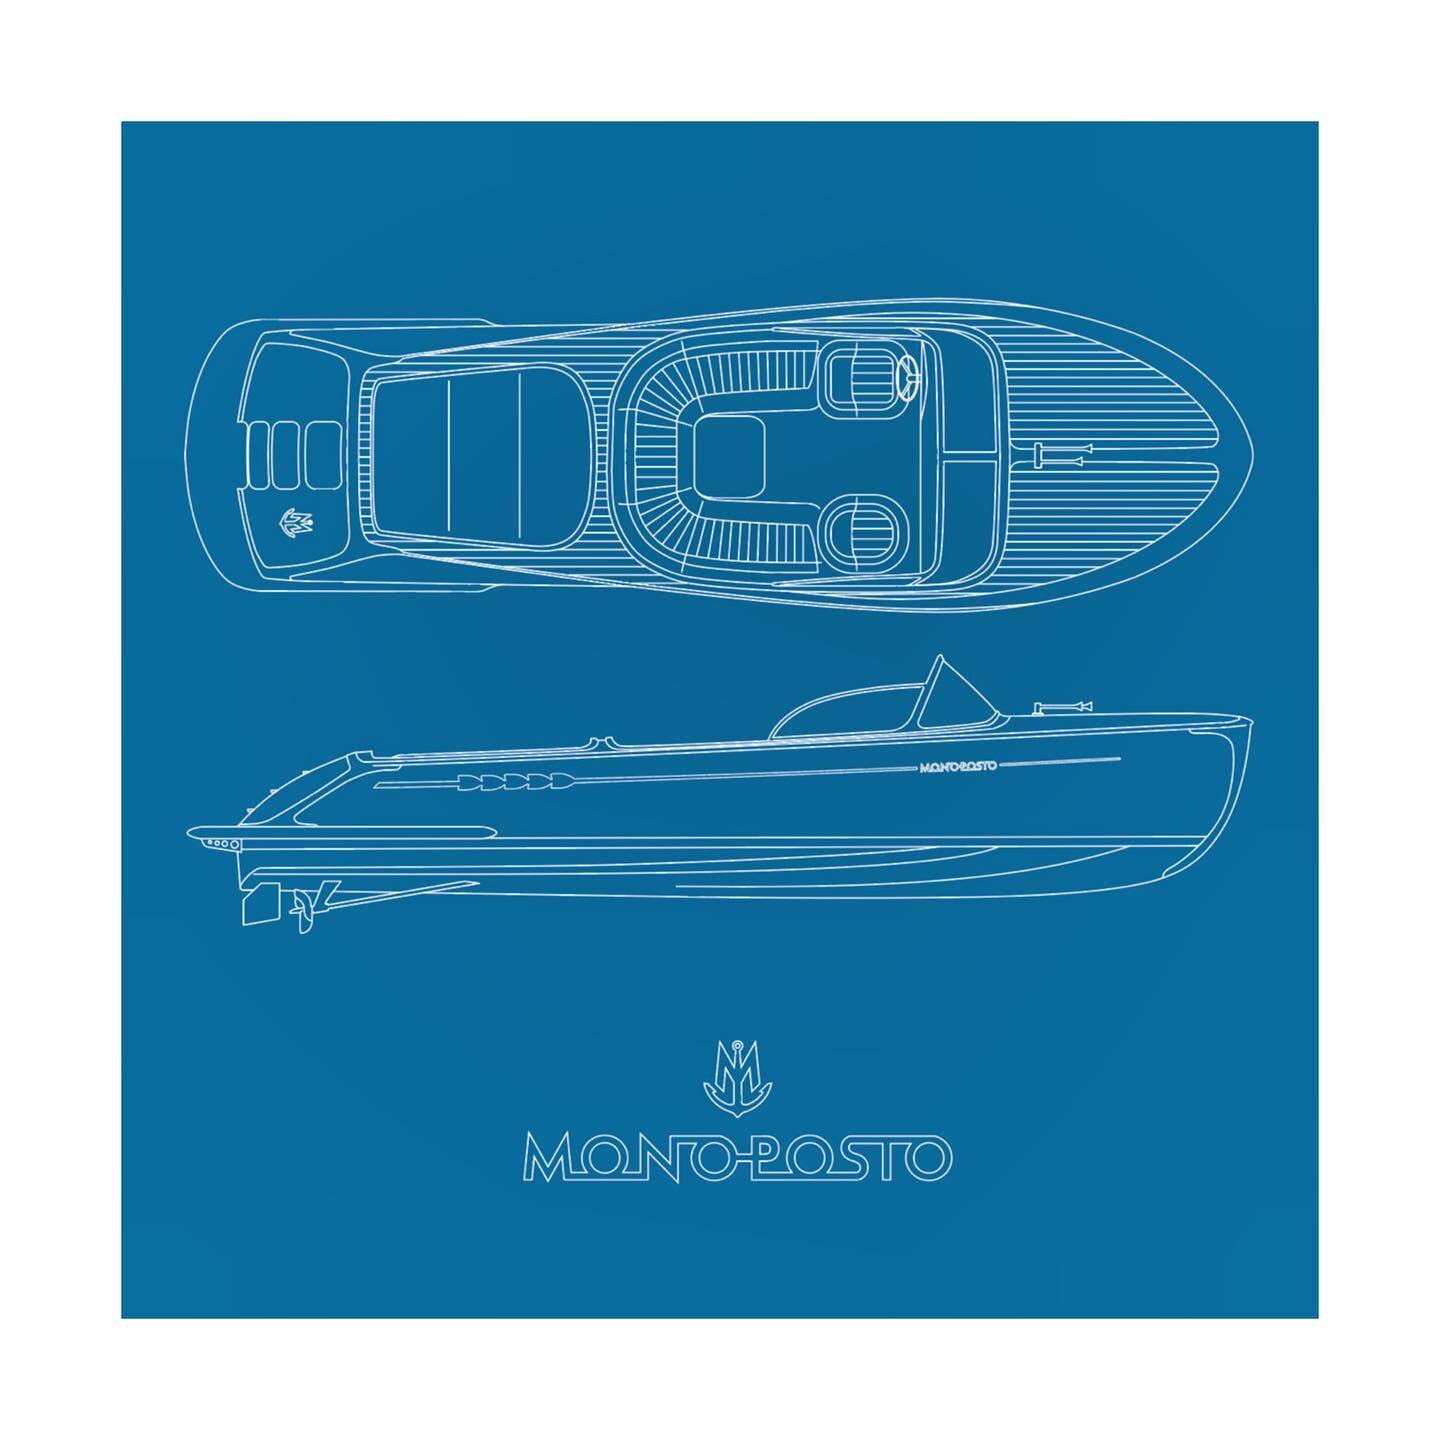 The beauty is in the details. The Monoposto Speed30&hellip; It&rsquo;s The Spirit of Monoposto. 🥂⚓️
*
*
Monoposto Yachts are distinct hand-crafted yachts that combine iconic design with modern technology.
*
*
#blueprint #drawing #details  #heritage 